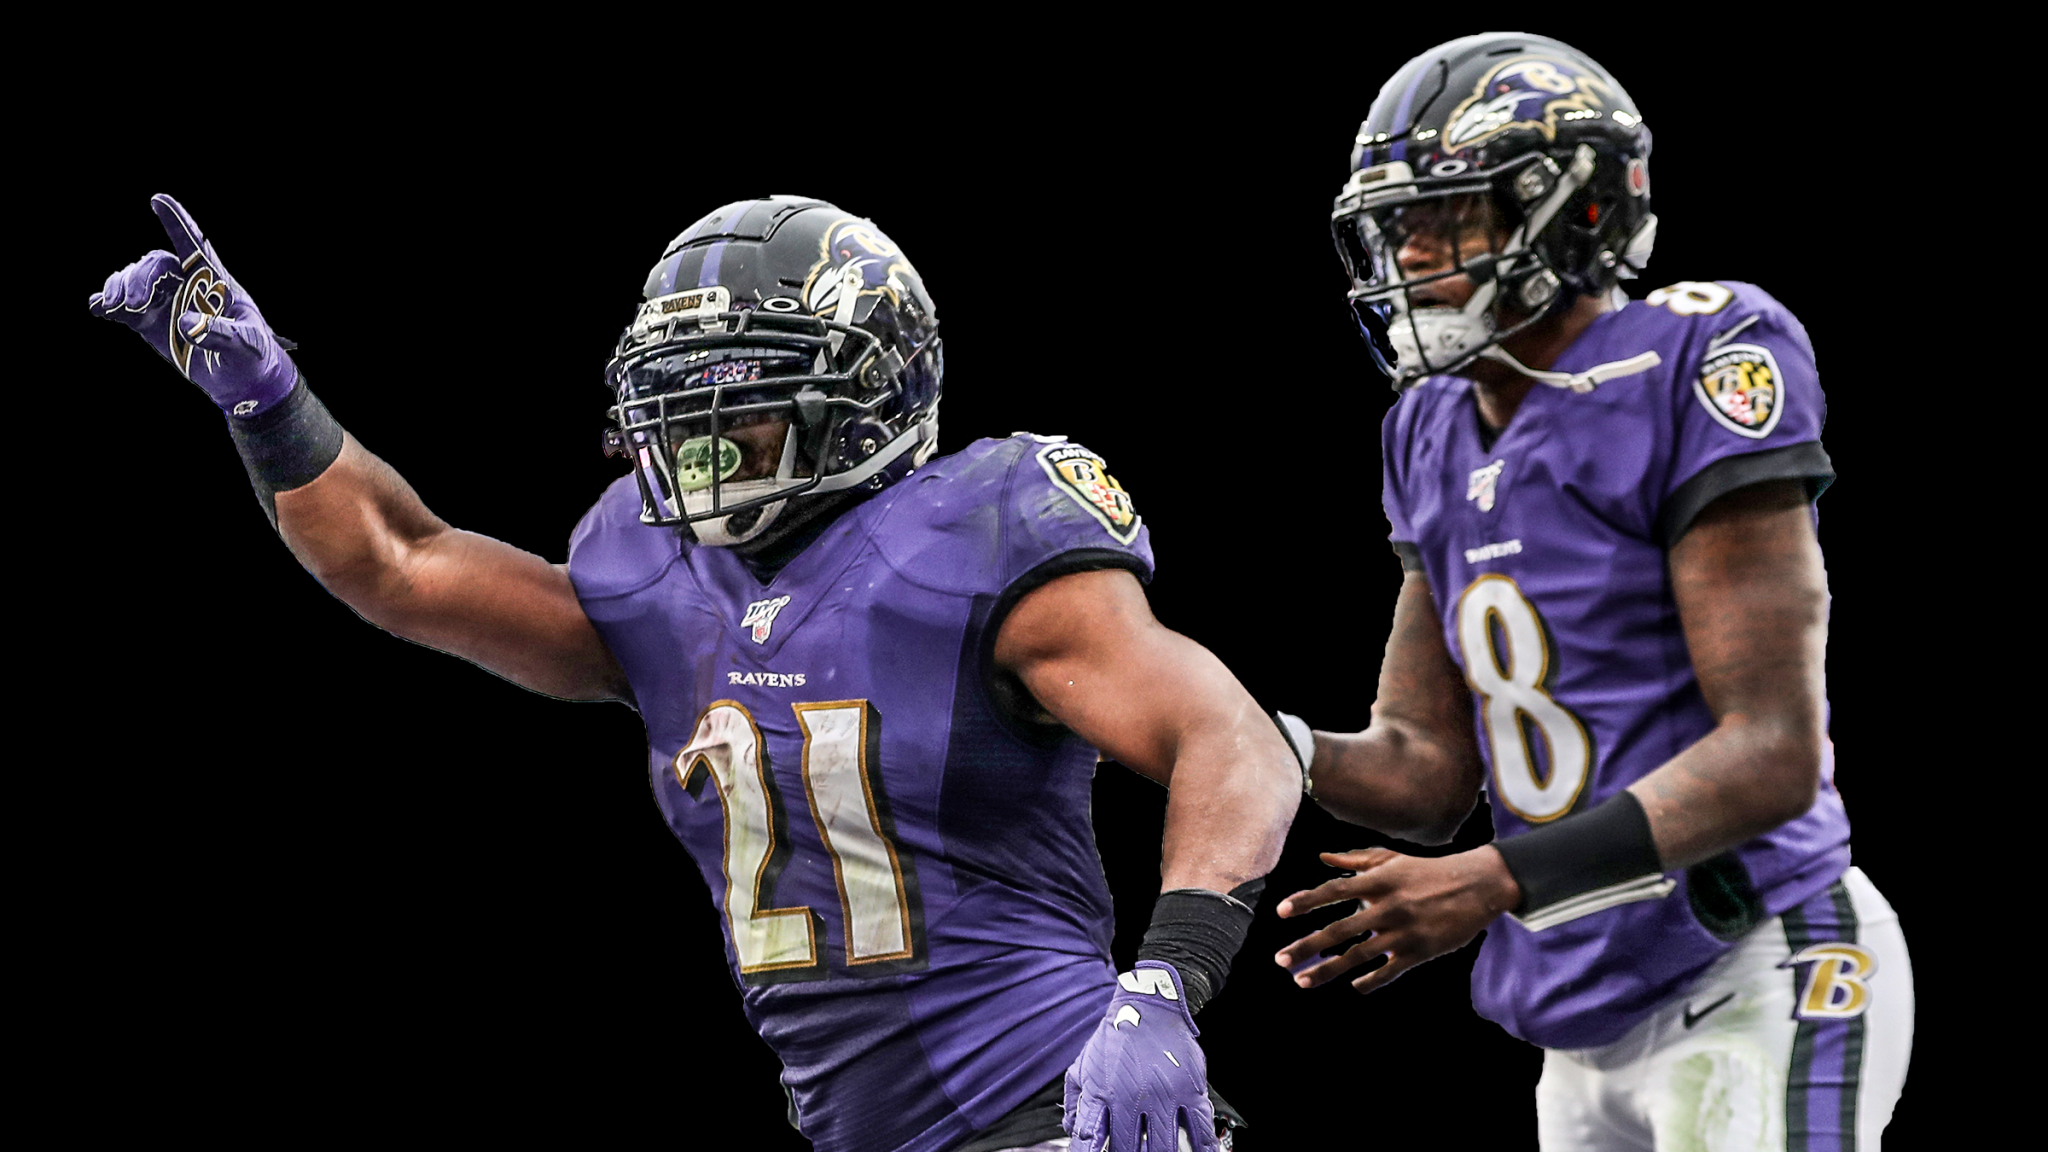 NFL Week 11: 5 afterthoughts, featuring the Ravens chasing history